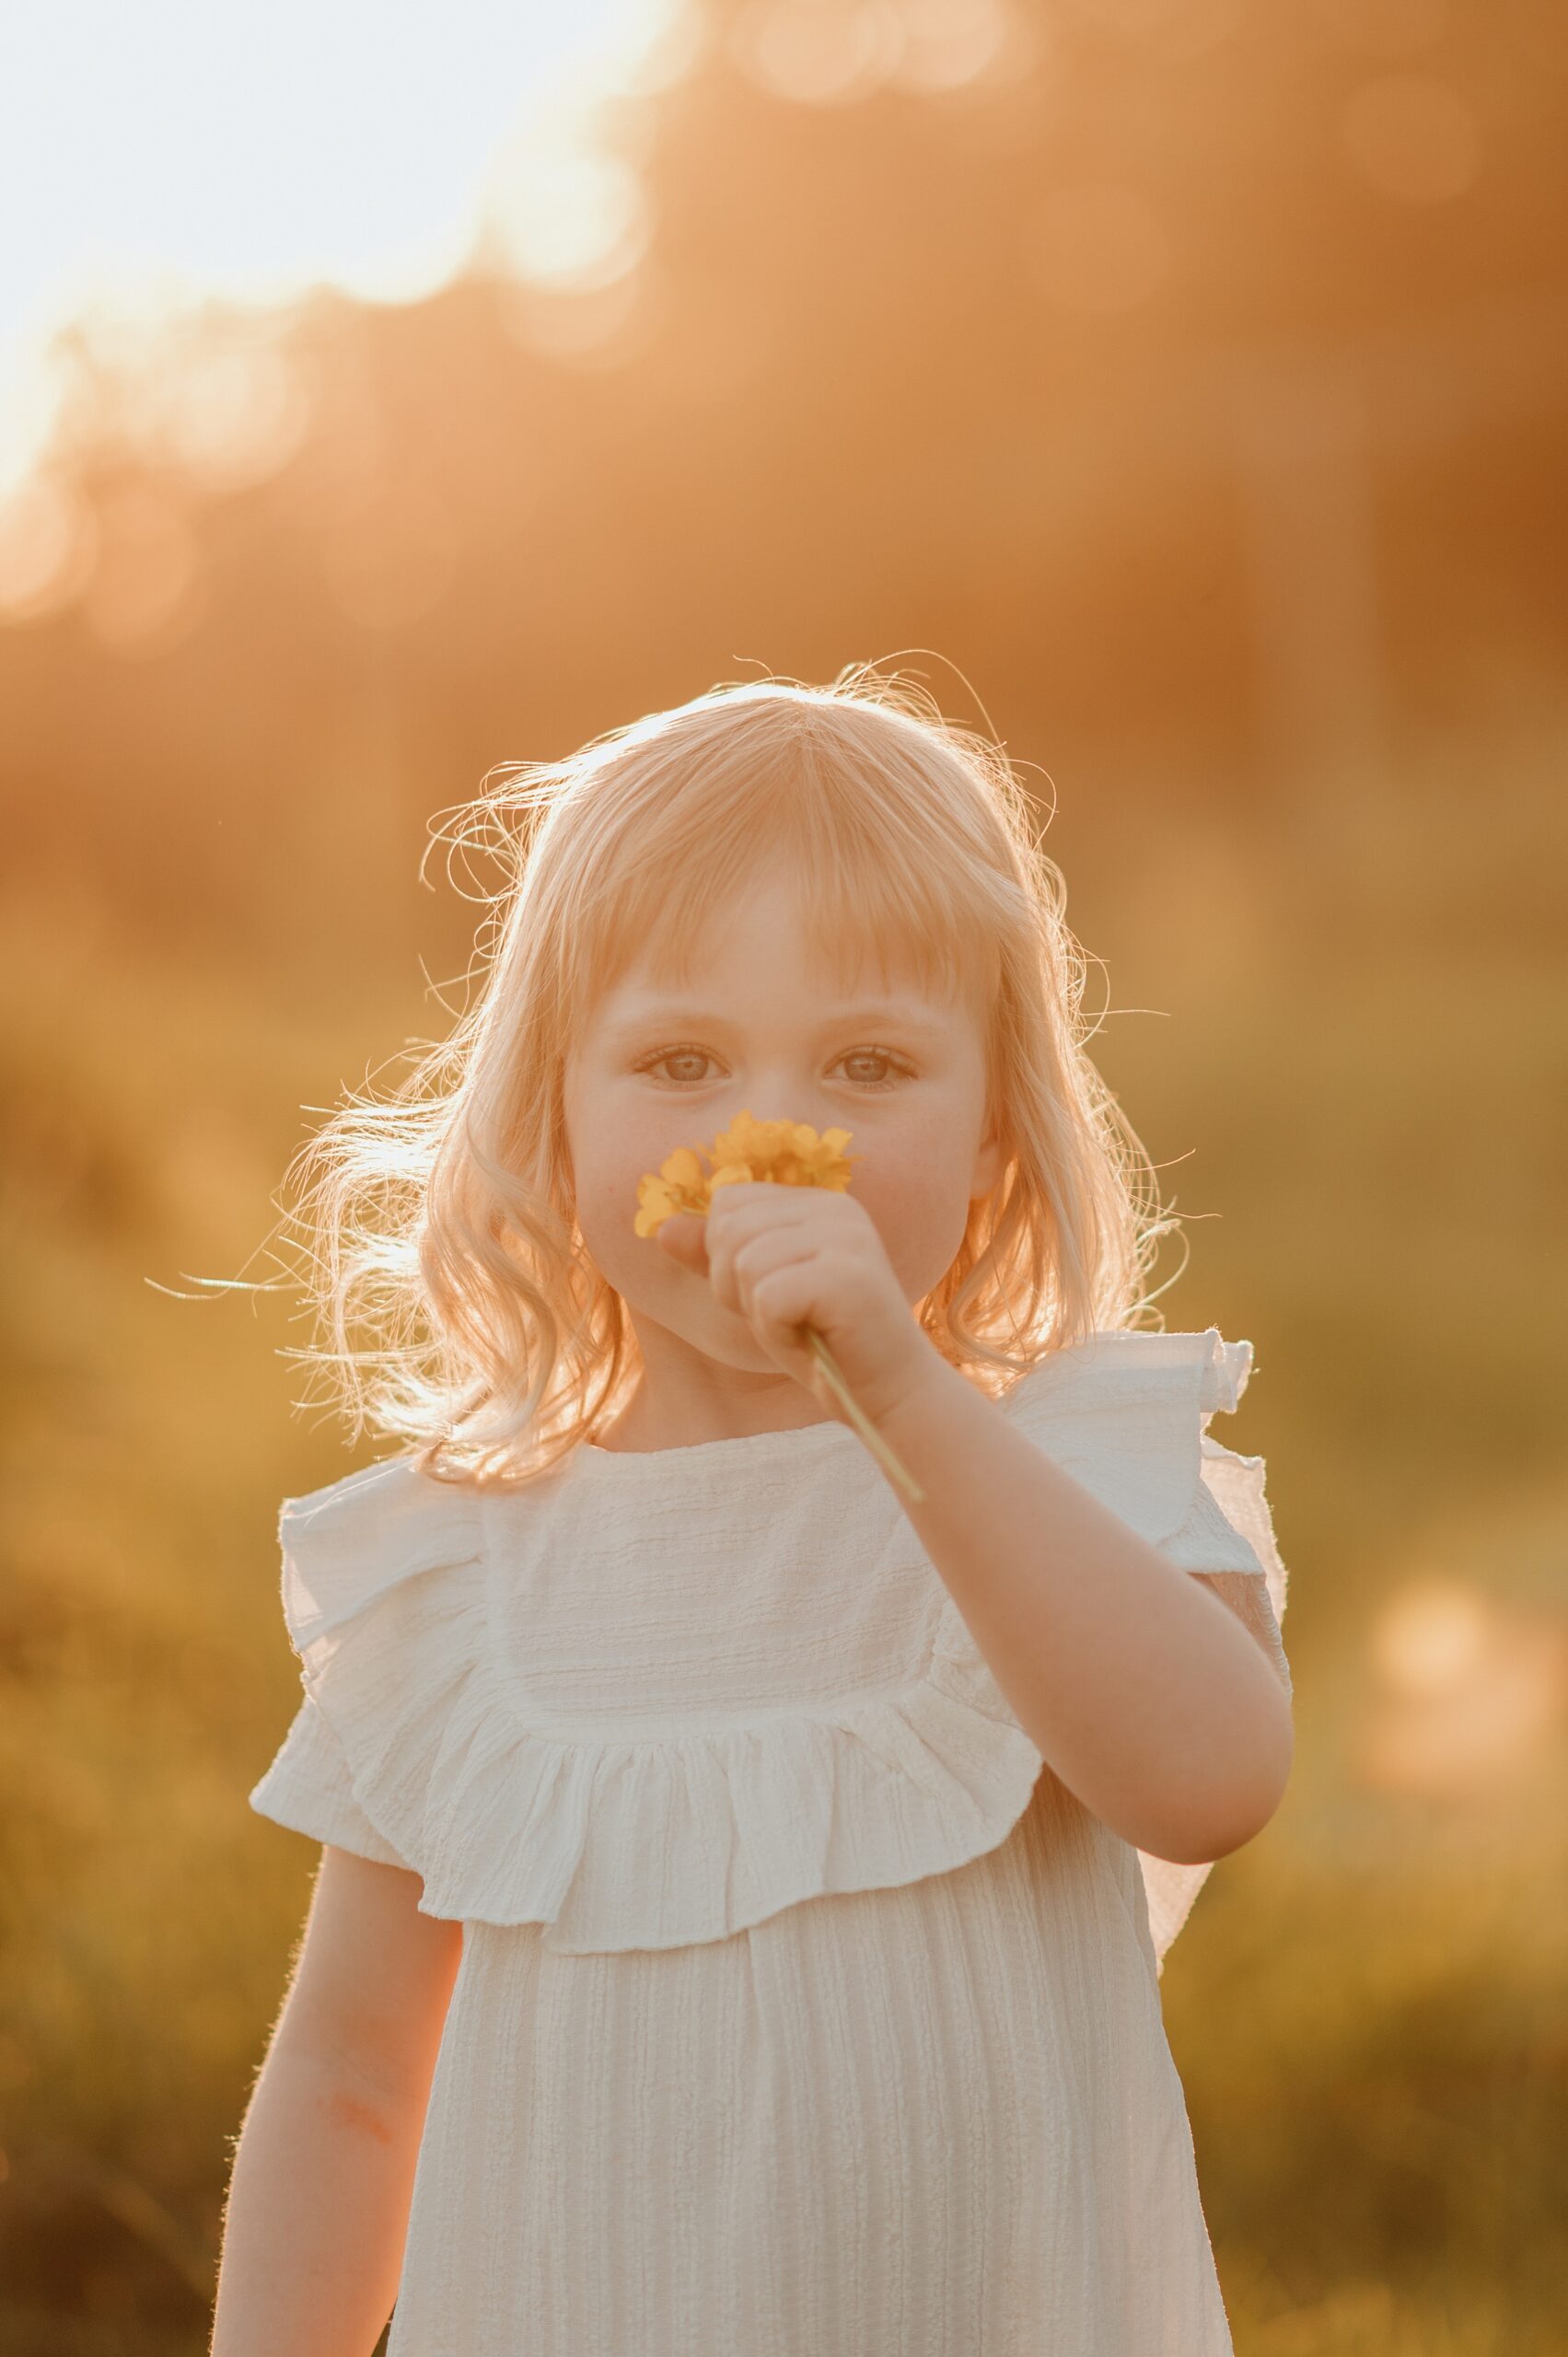 A toddler girl in a white dress smells some picked flowers in a field at sunset